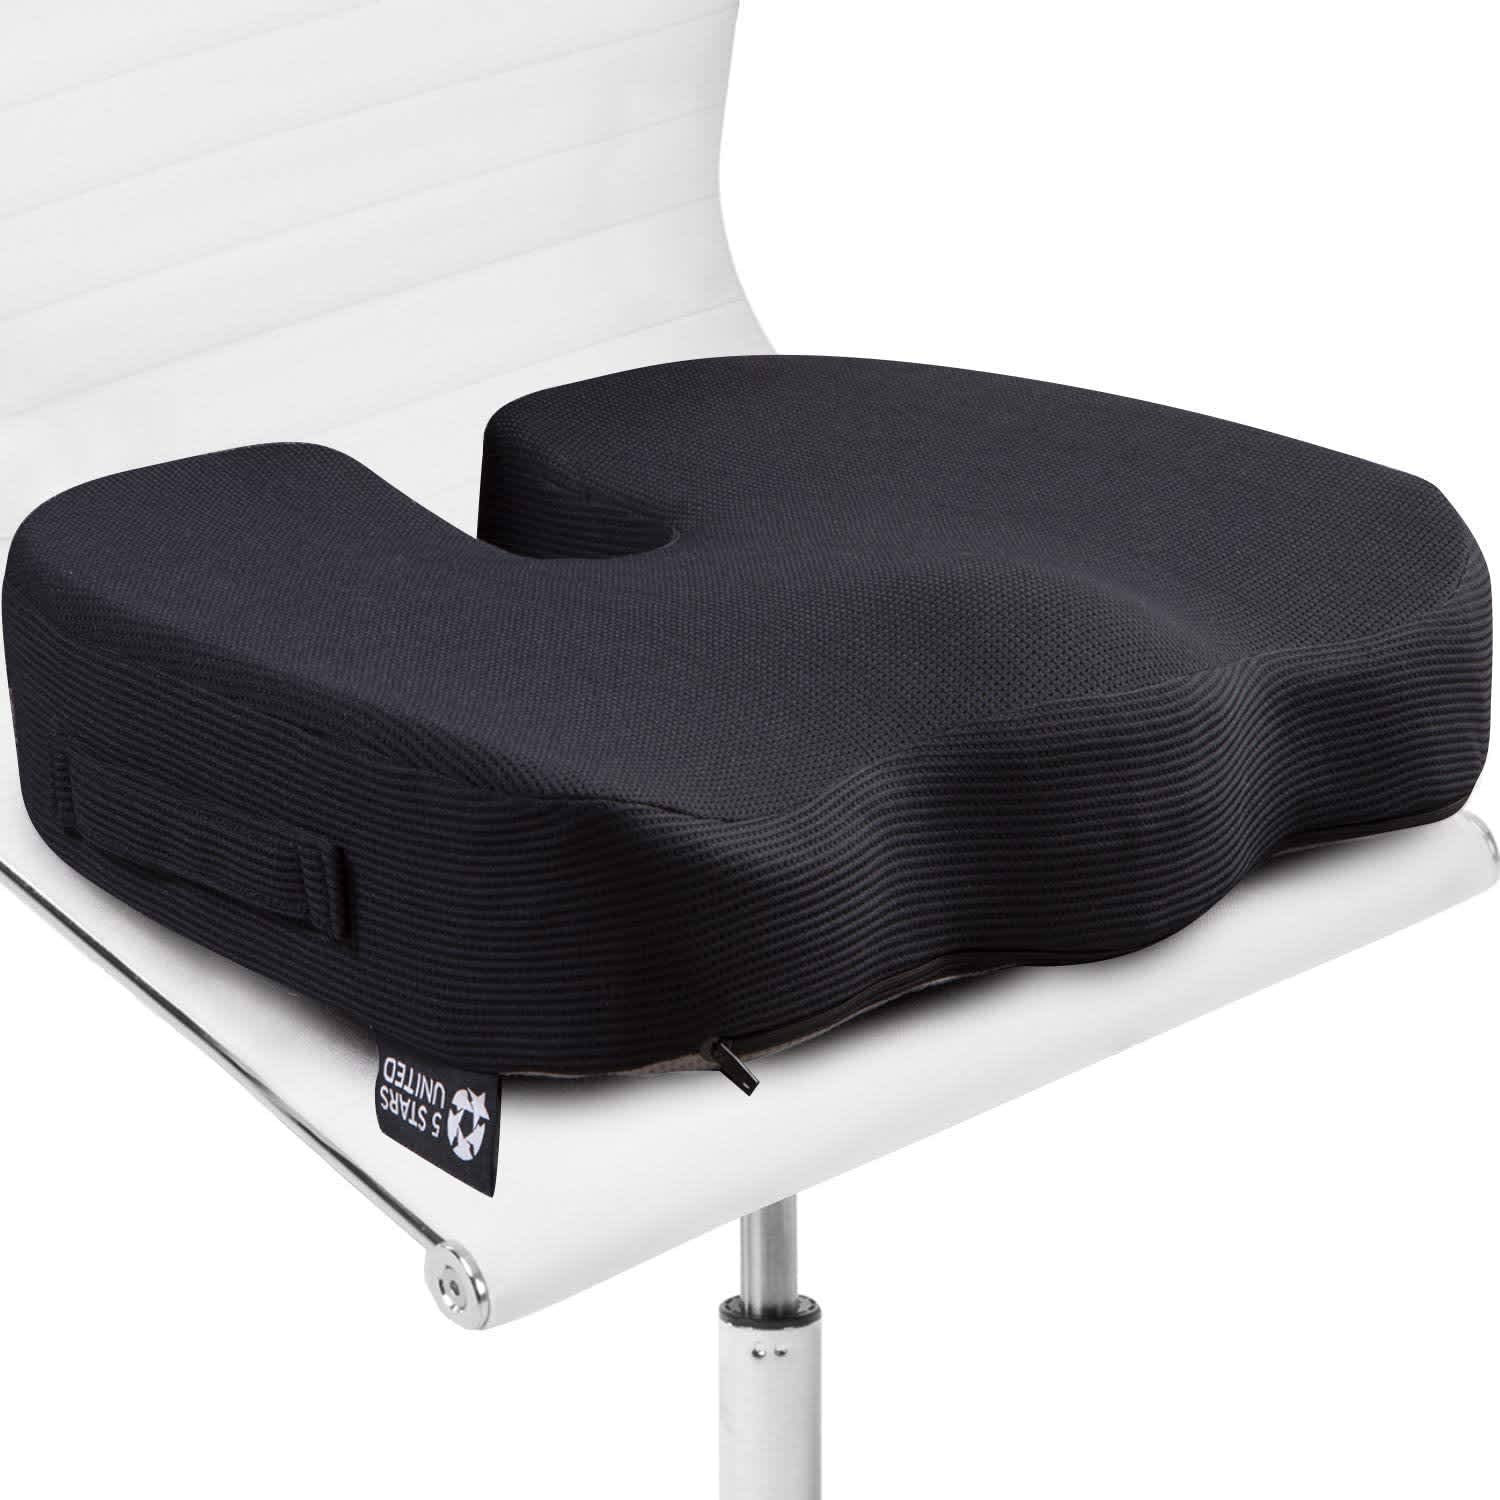 https://cdn.apartmenttherapy.info/image/upload/v1607967909/gen-workflow/product-database/office-chair-seat-cushion-amazon.jpg